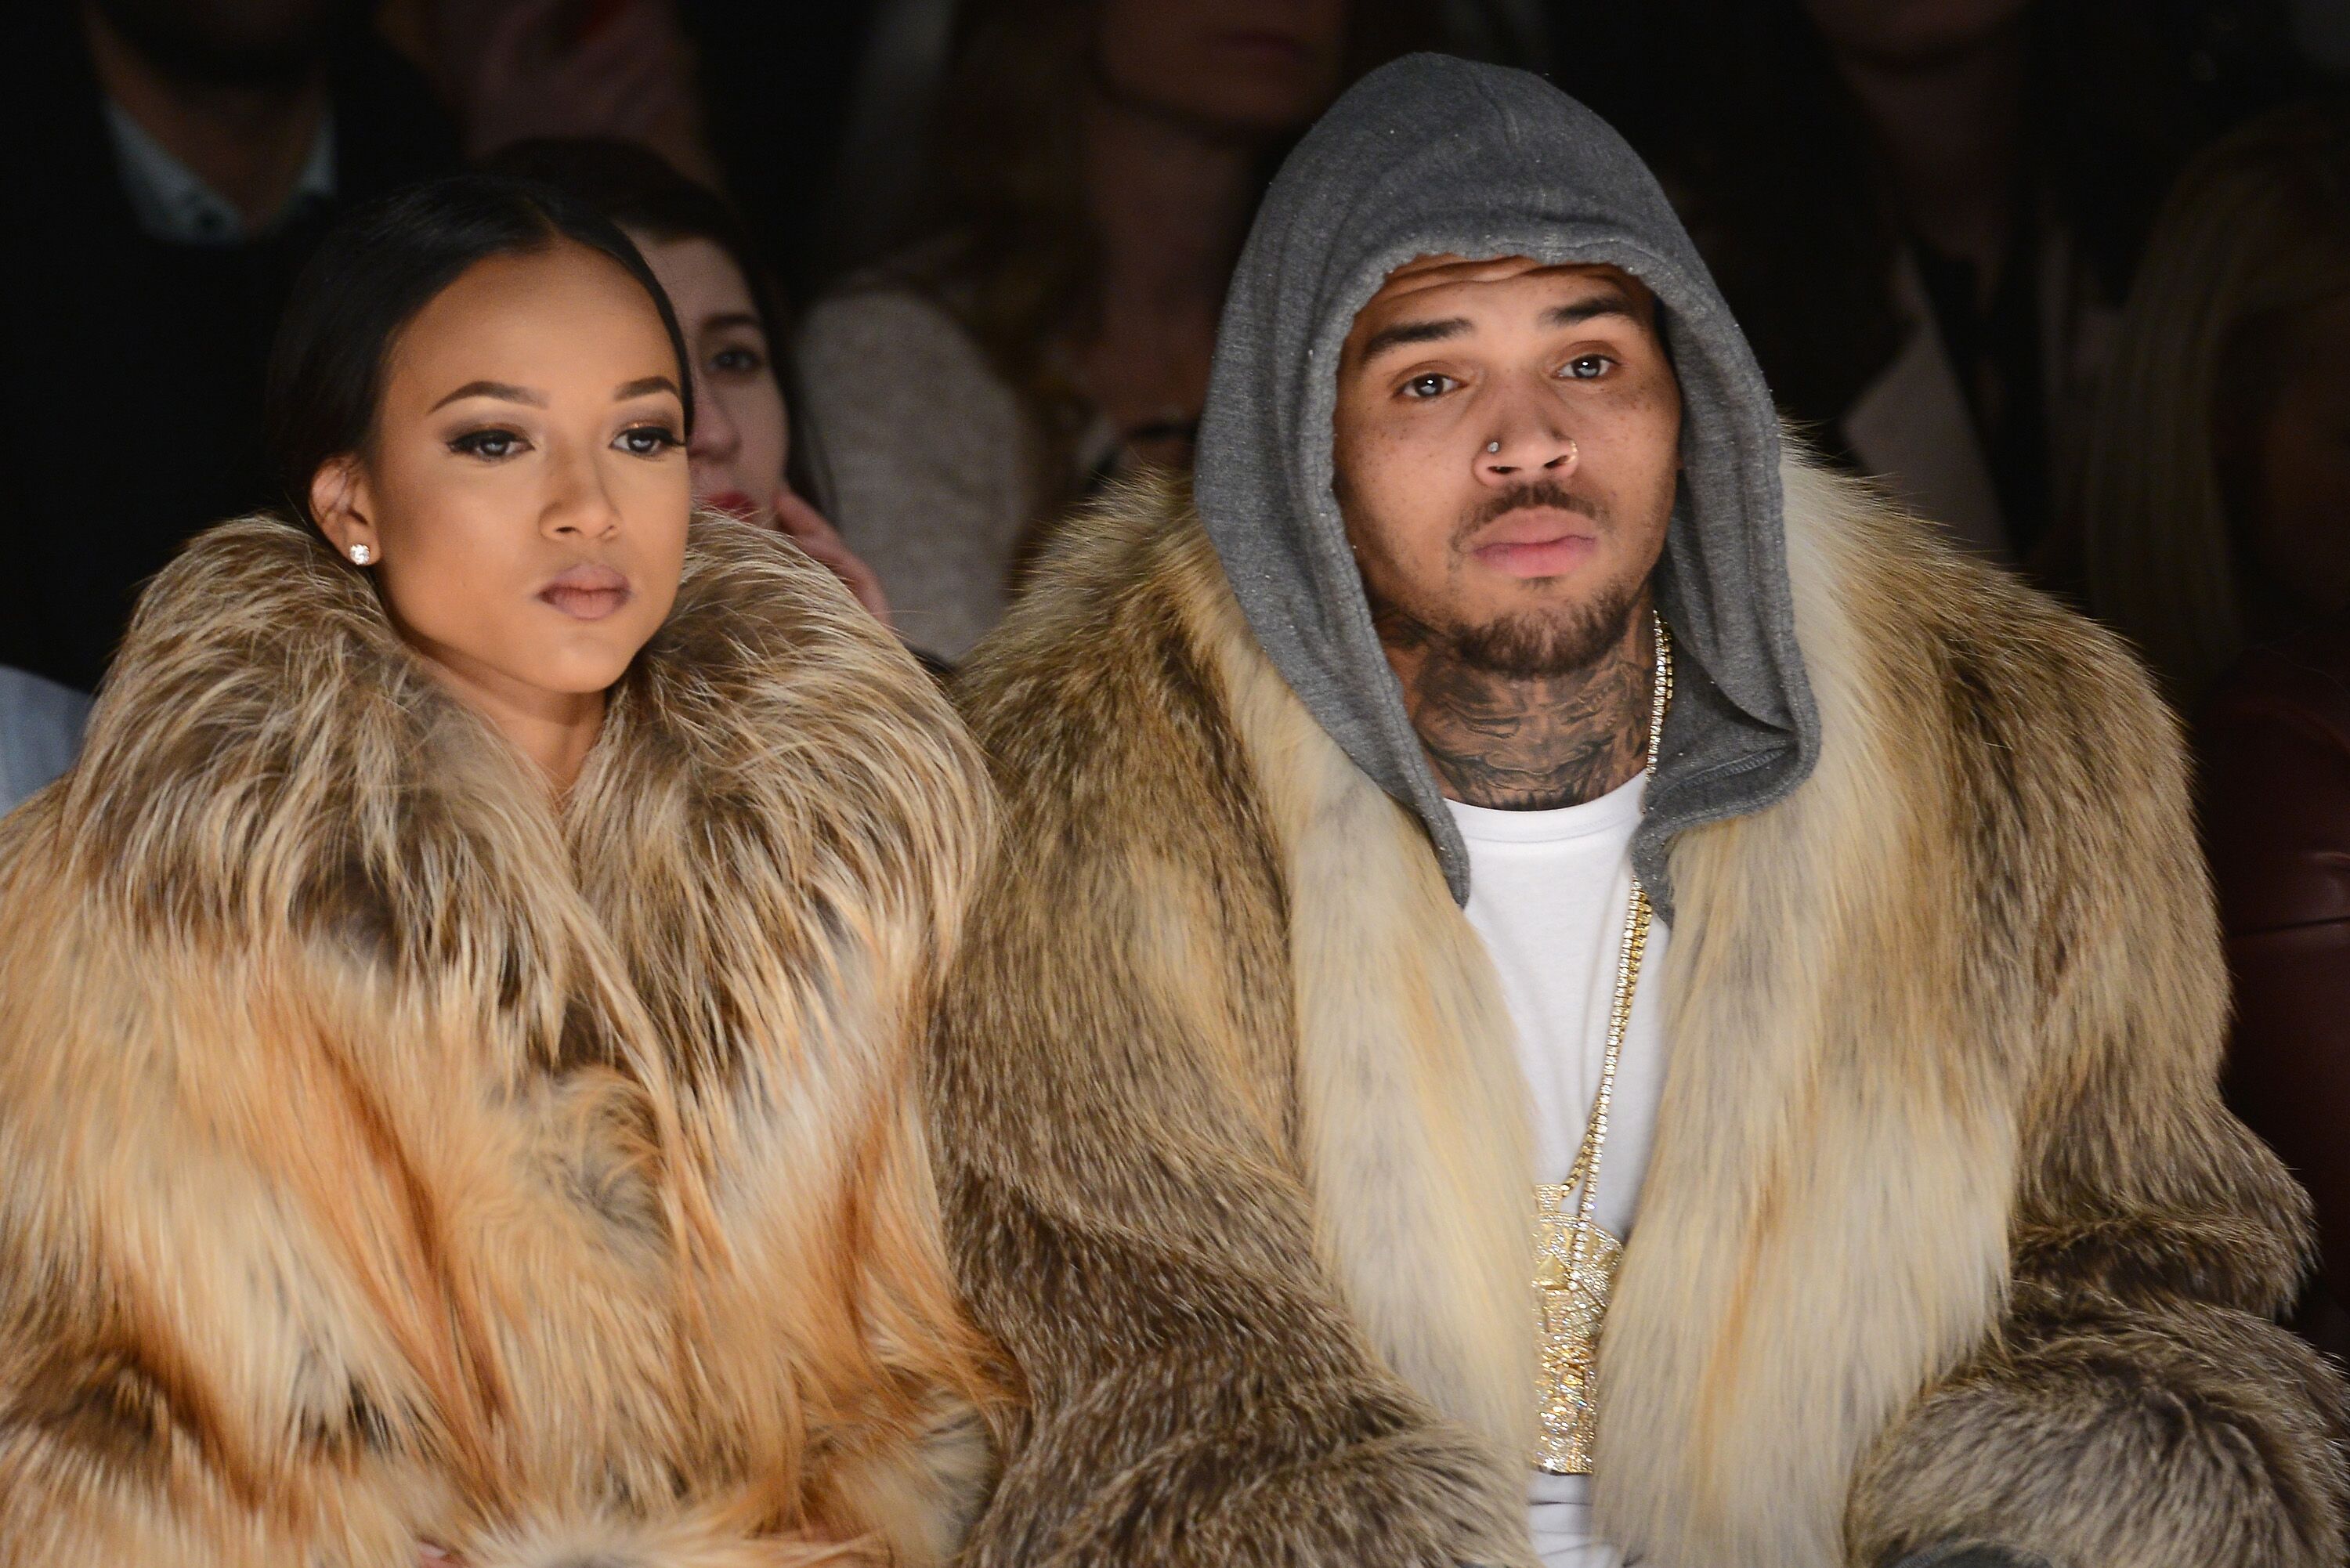 Chris Brown and Ammika Harris at the Mercedes-Benz Fashion Week in February 2015. | Photo: Getty Images